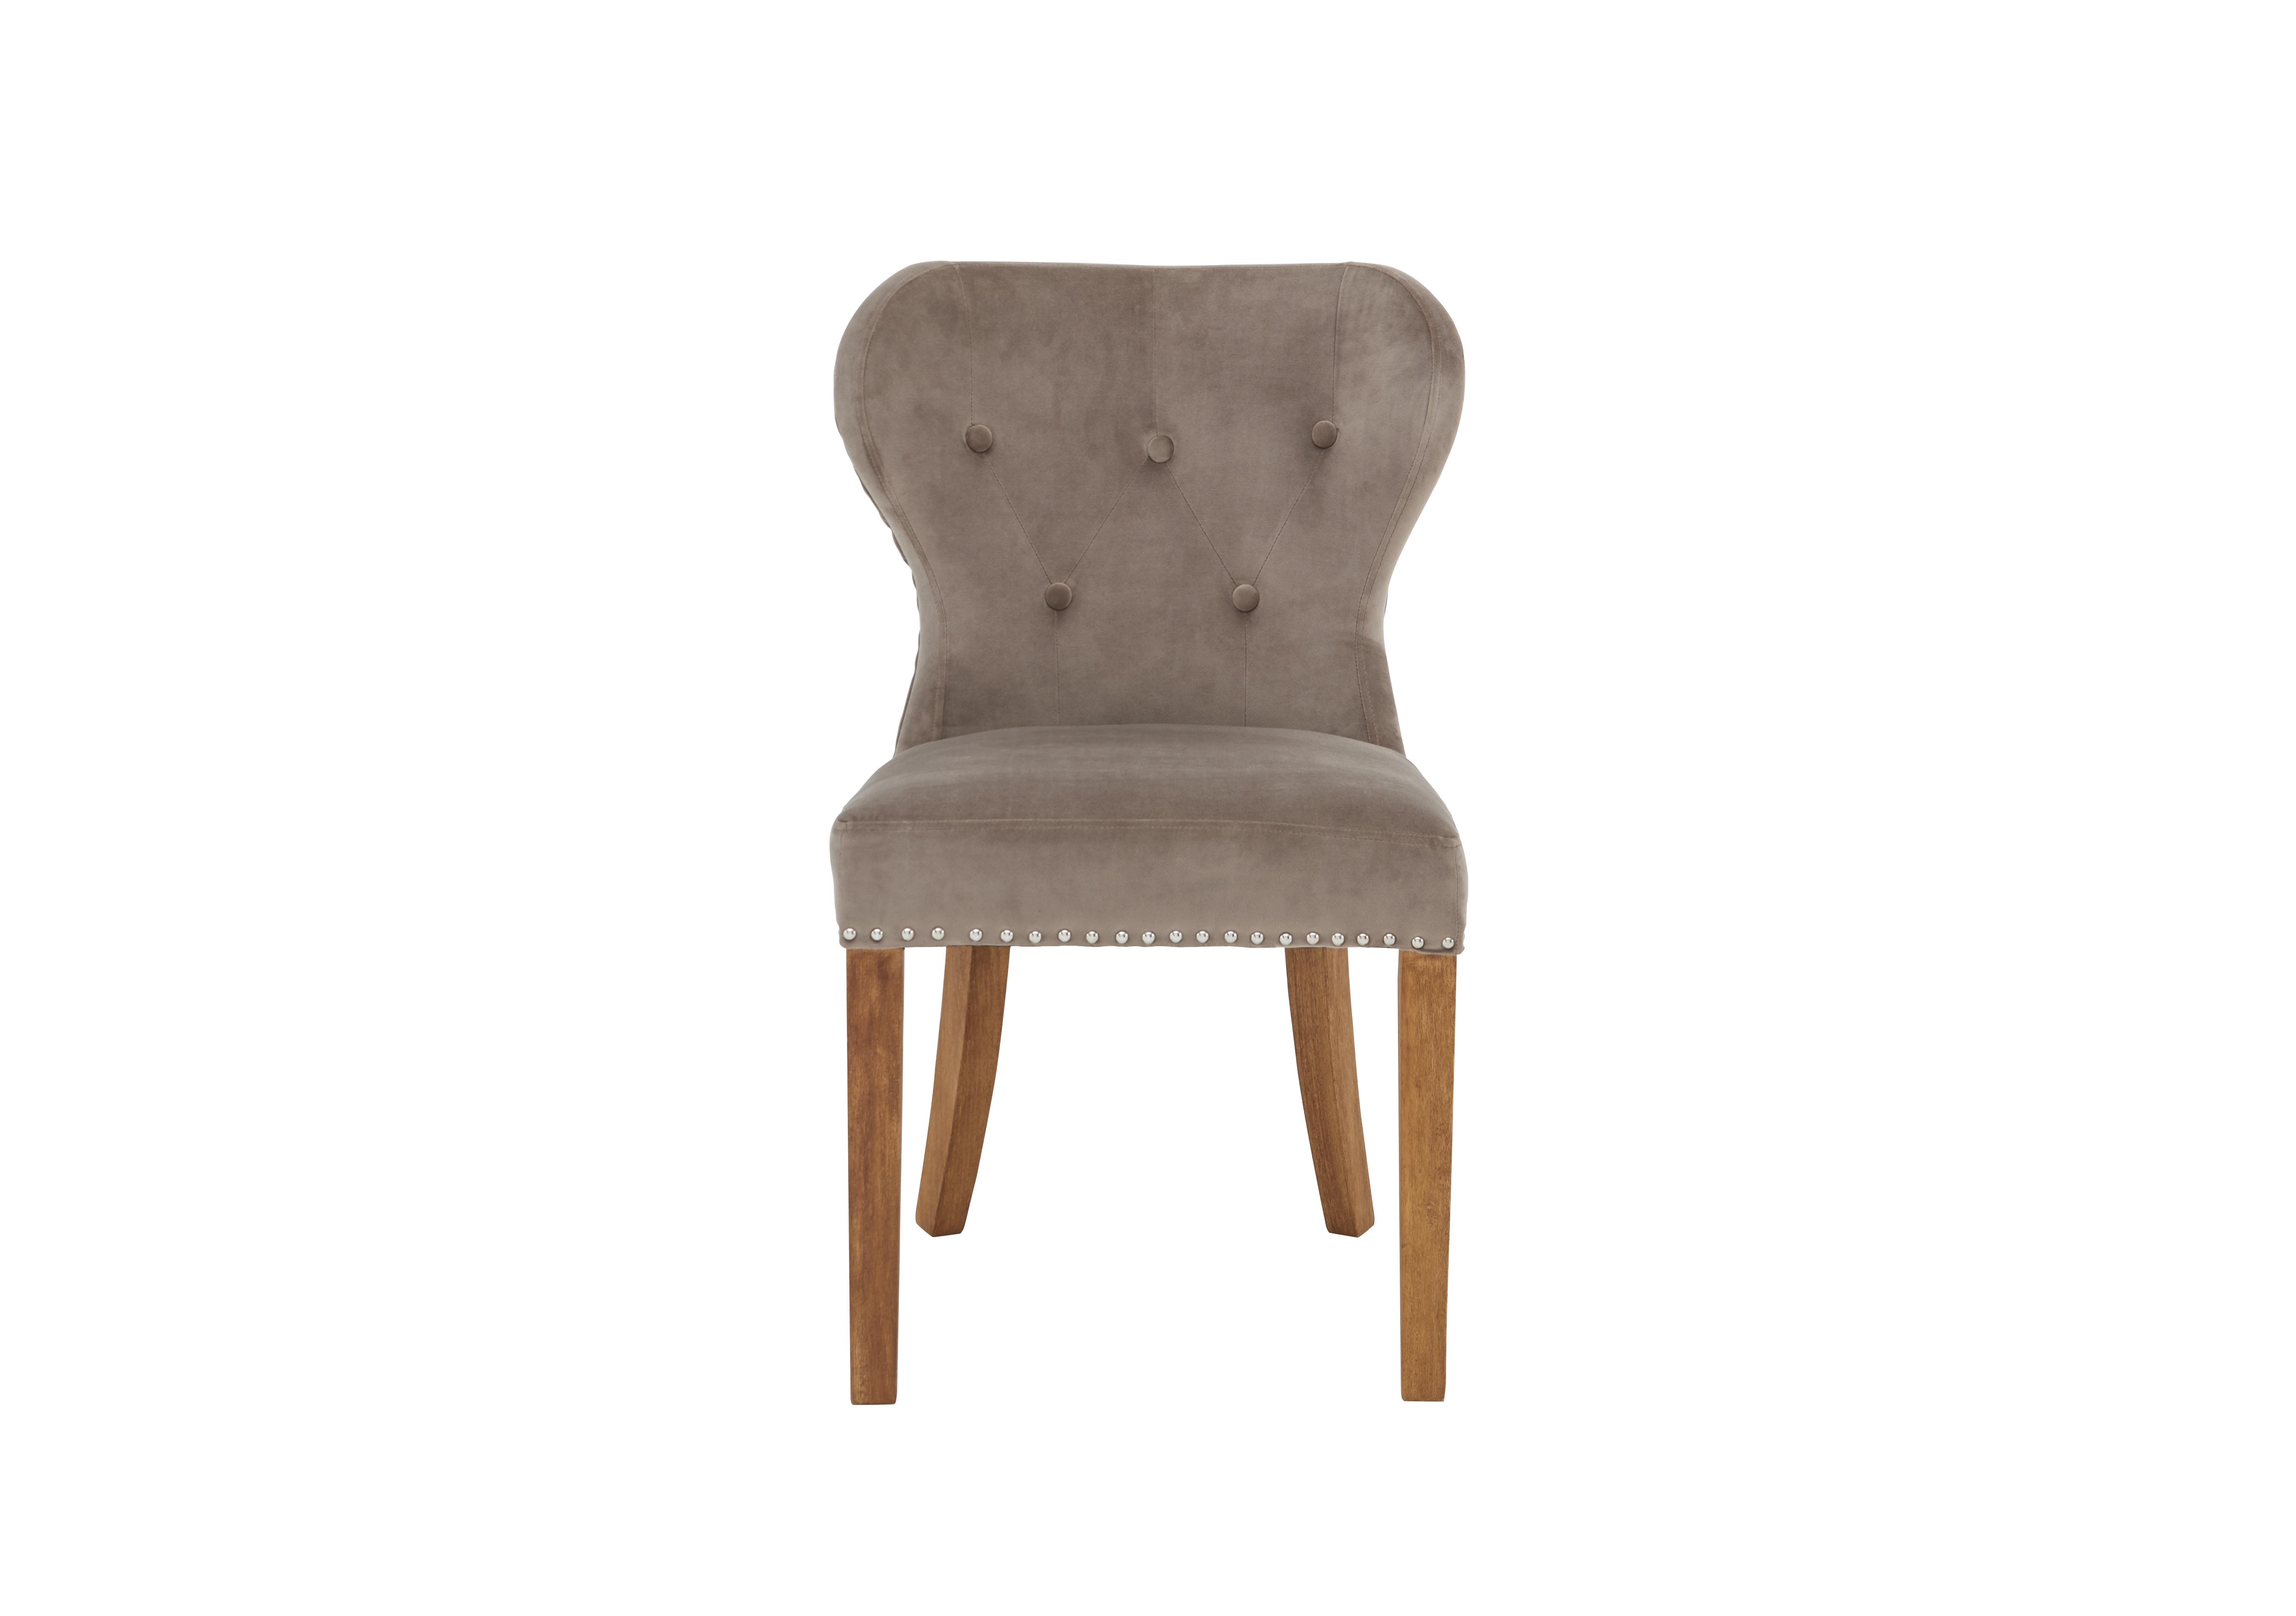 Chennai Upholstered Dining Chair in Taupe Chairs on Furniture Village